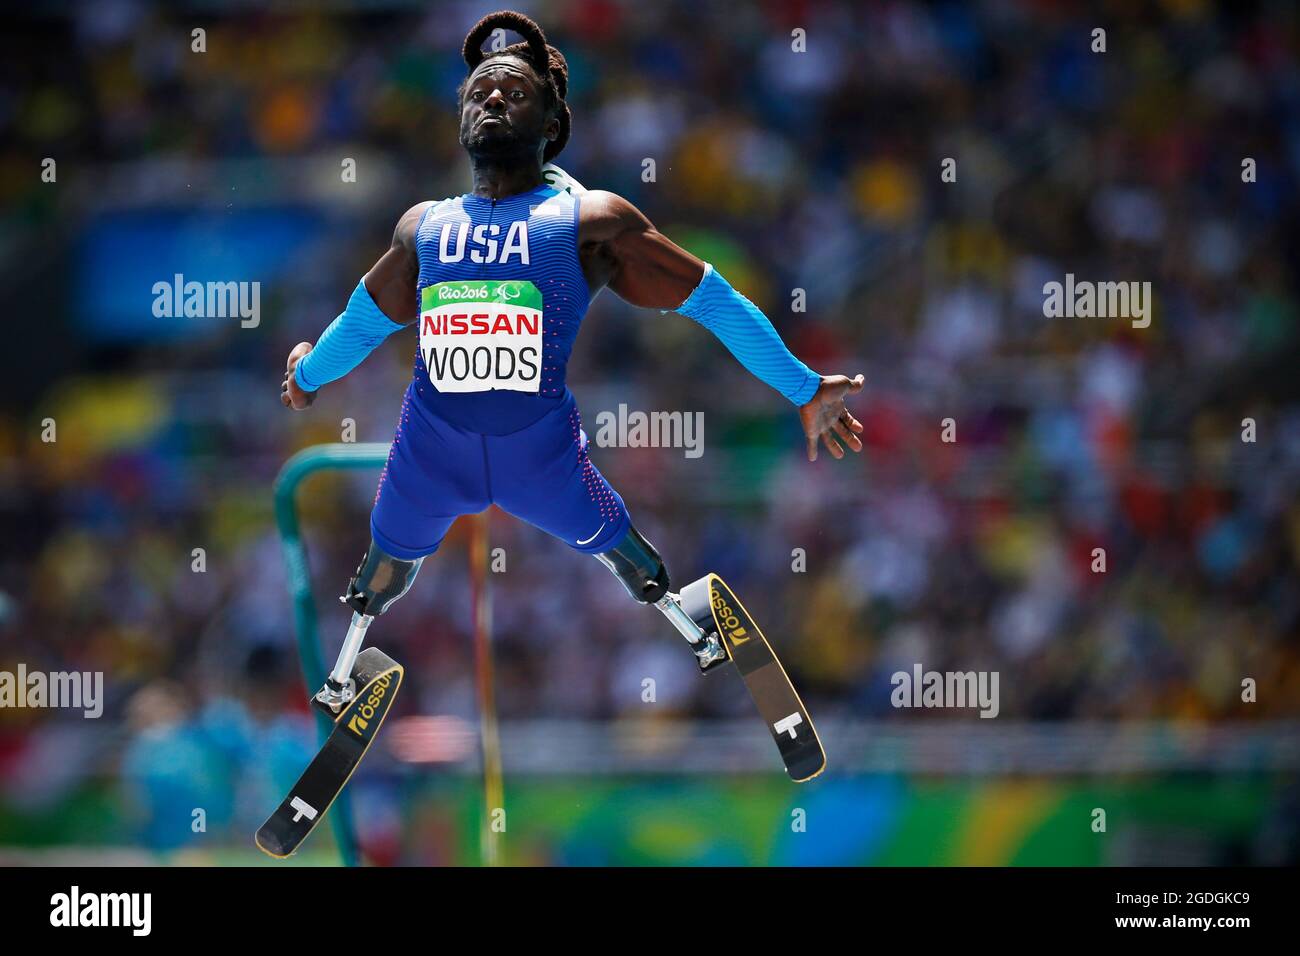 Regas Woods of USA Paralympic Games team long jump T42. Running amputee sprinter competes with prosthetic running blades Stock Photo